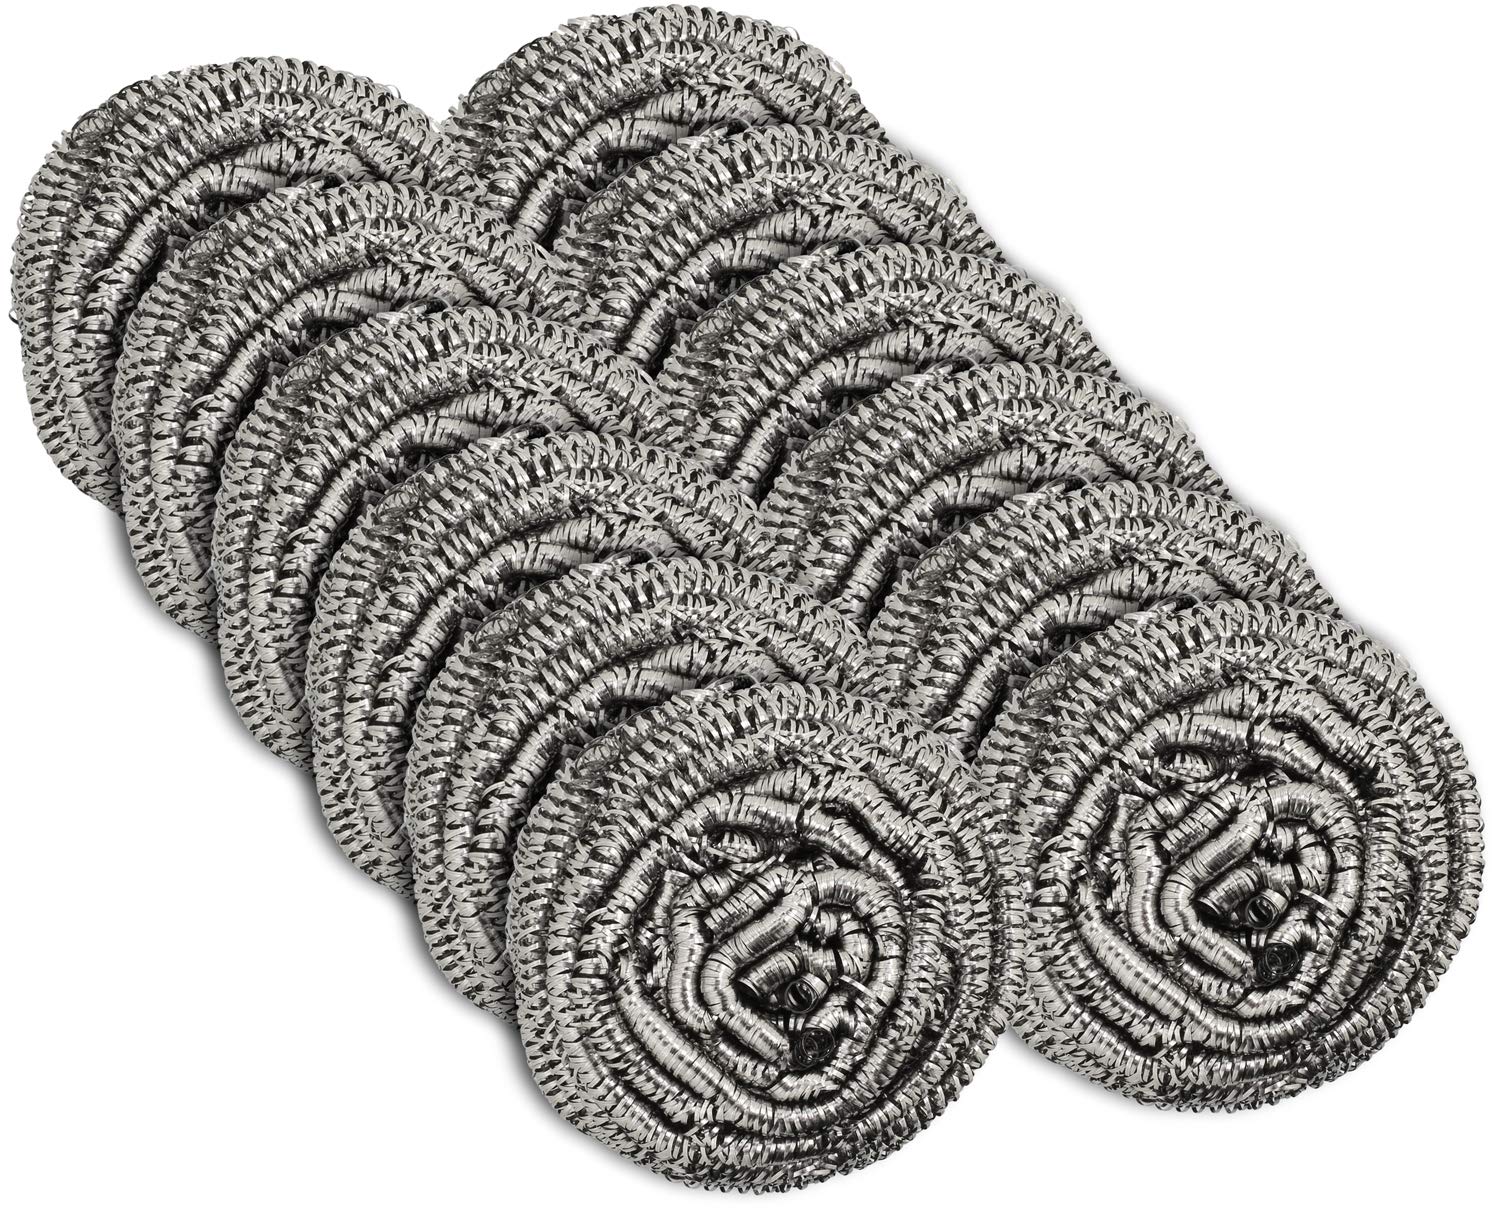 12 Pack Stainless Steel Scourers by Scrub It Steel Wool Scrubber Pad Used  for Dishes, Pots